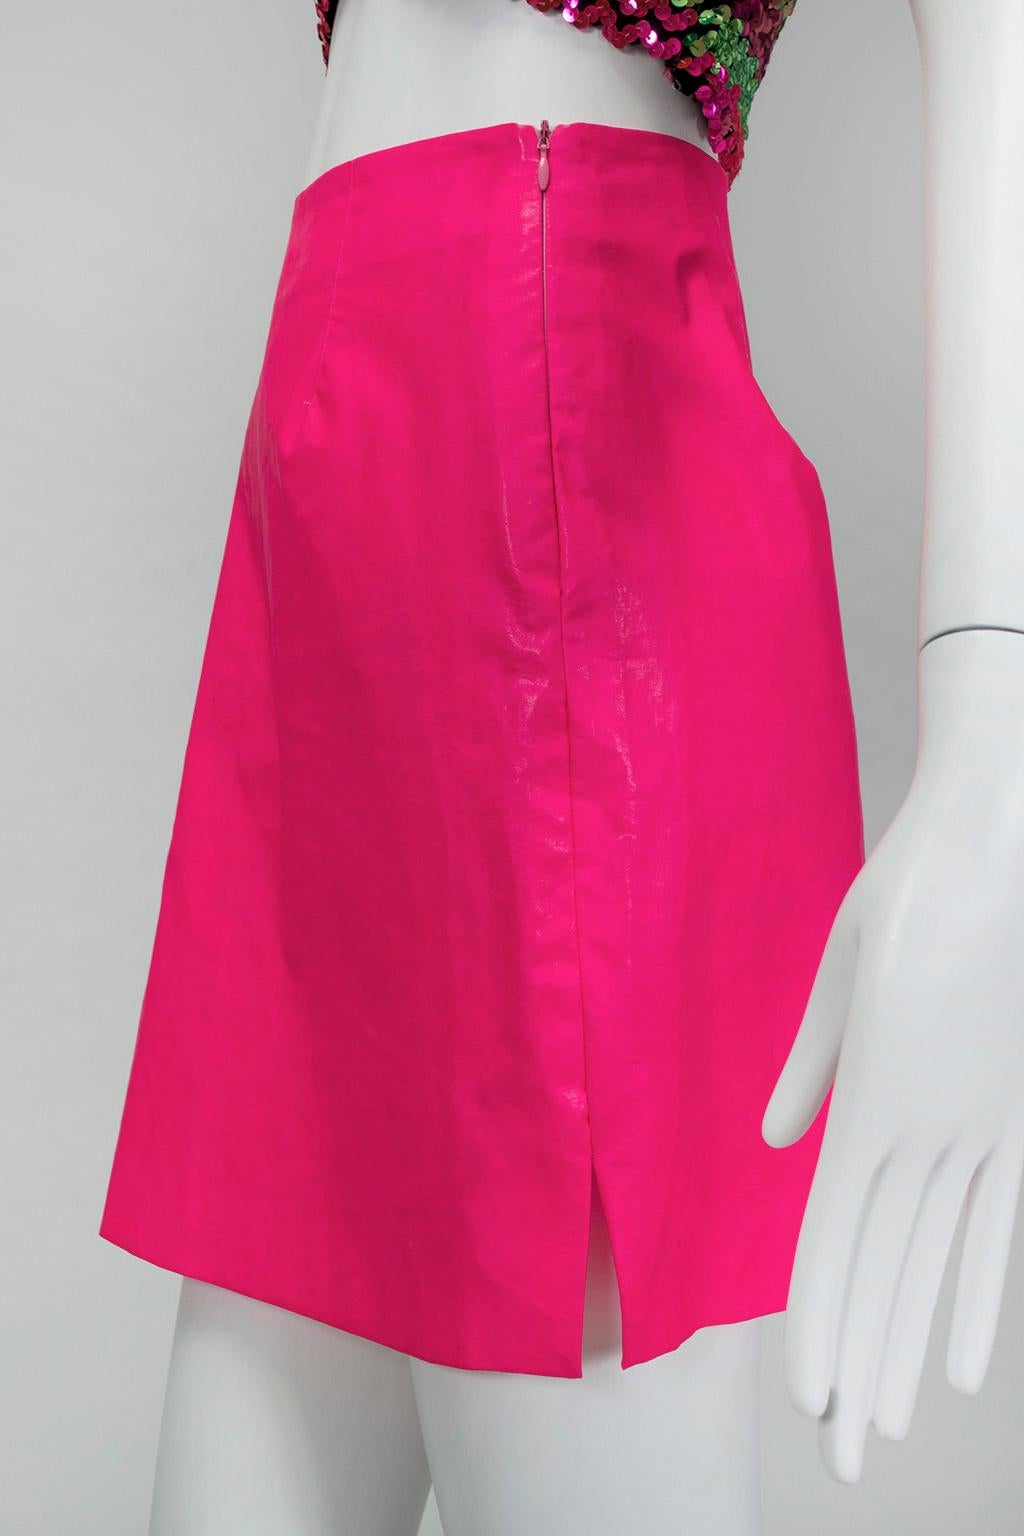 Versace Barbiecore Hot Pink Waxed Vegan Leather Mini Skirt - M, 1990s In Good Condition For Sale In Tucson, AZ